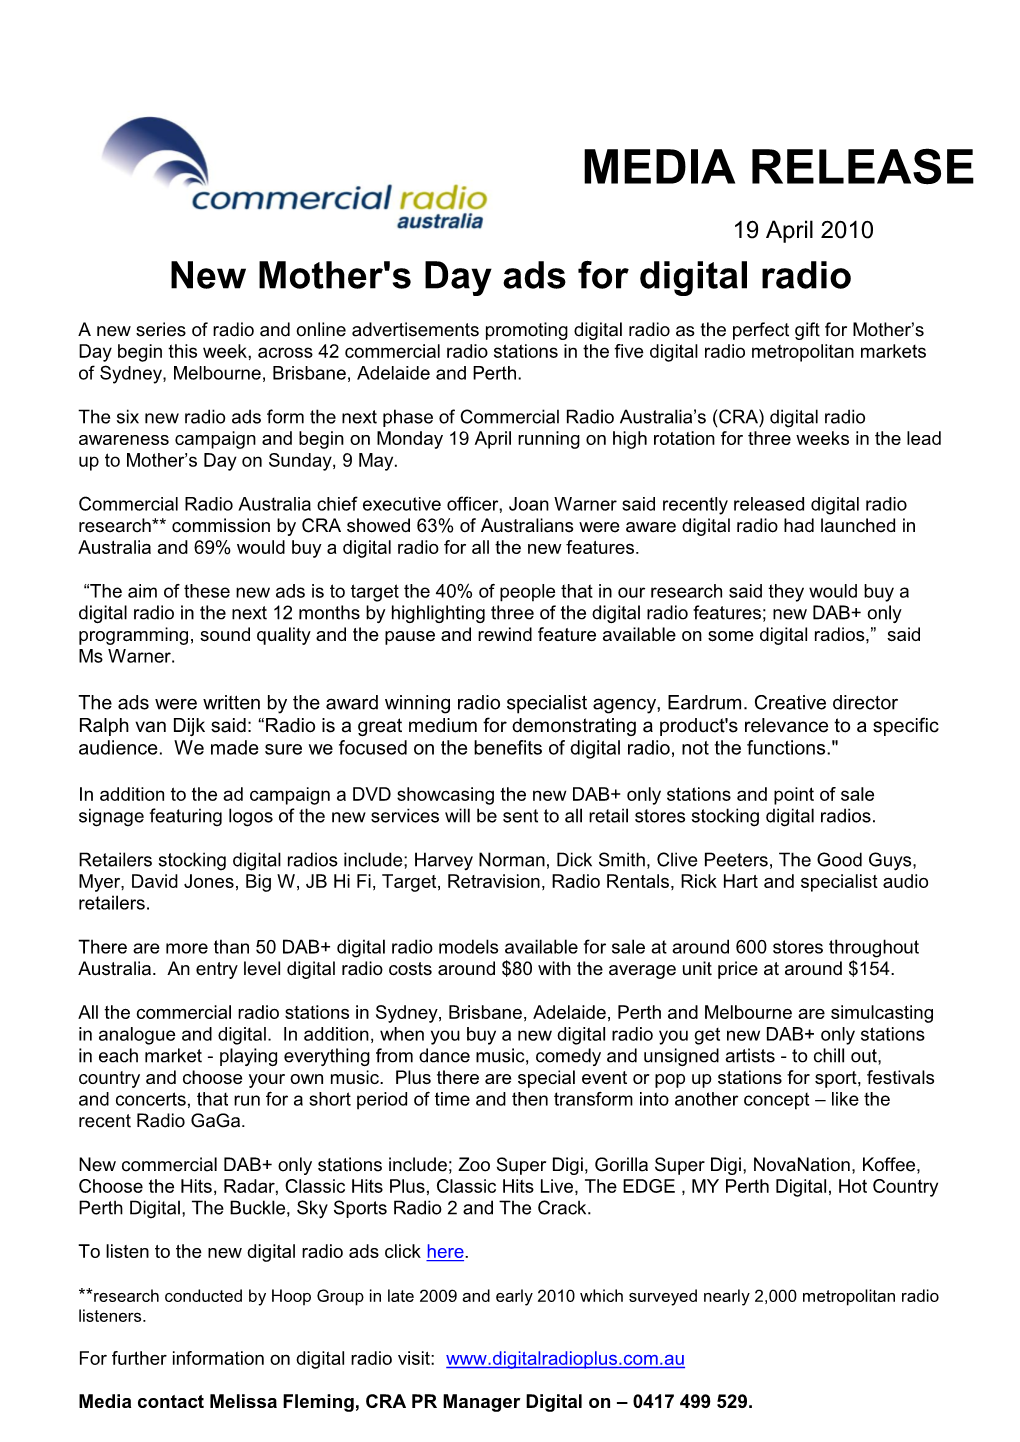 Commercial Radio Stations in the Five Digital Radio Metropolitan Markets of Sydney, Melbourne, Brisbane, Adelaide and Perth